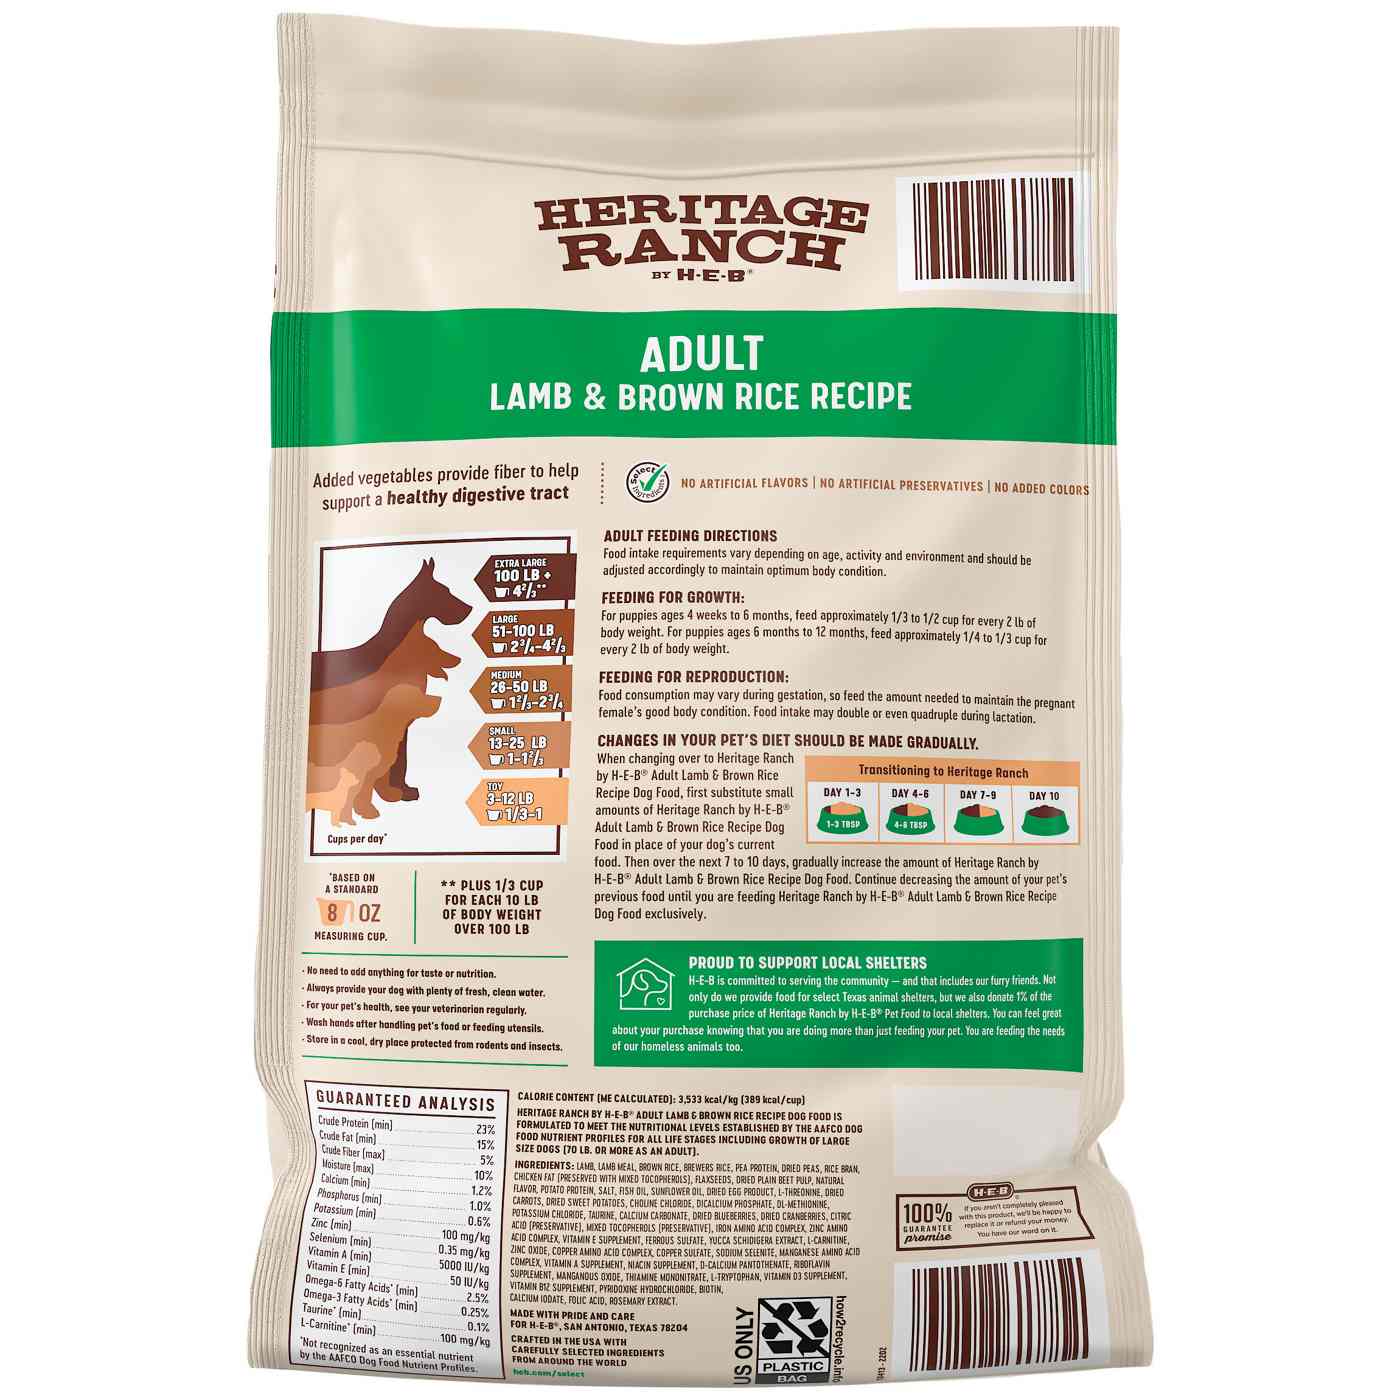 Heritage Ranch by H-E-B Adult Dry Dog Food - Lamb & Brown Rice; image 2 of 2